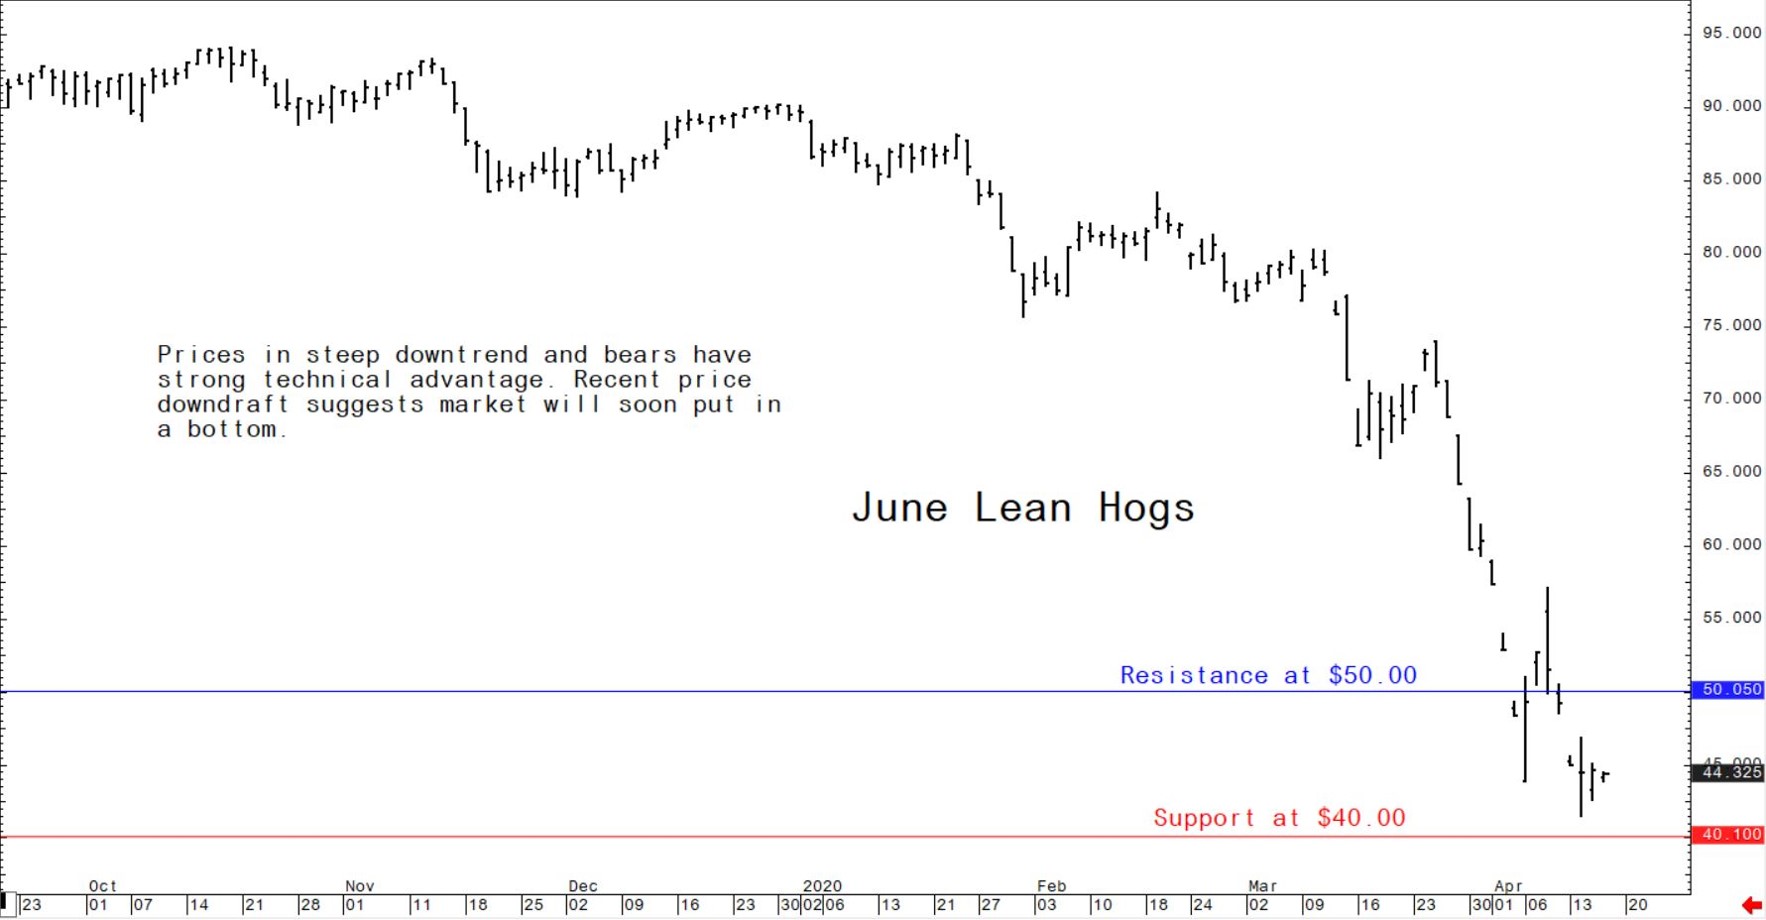 Lean hog prices in the US in steep downtrend and bears have strong technical advantage.